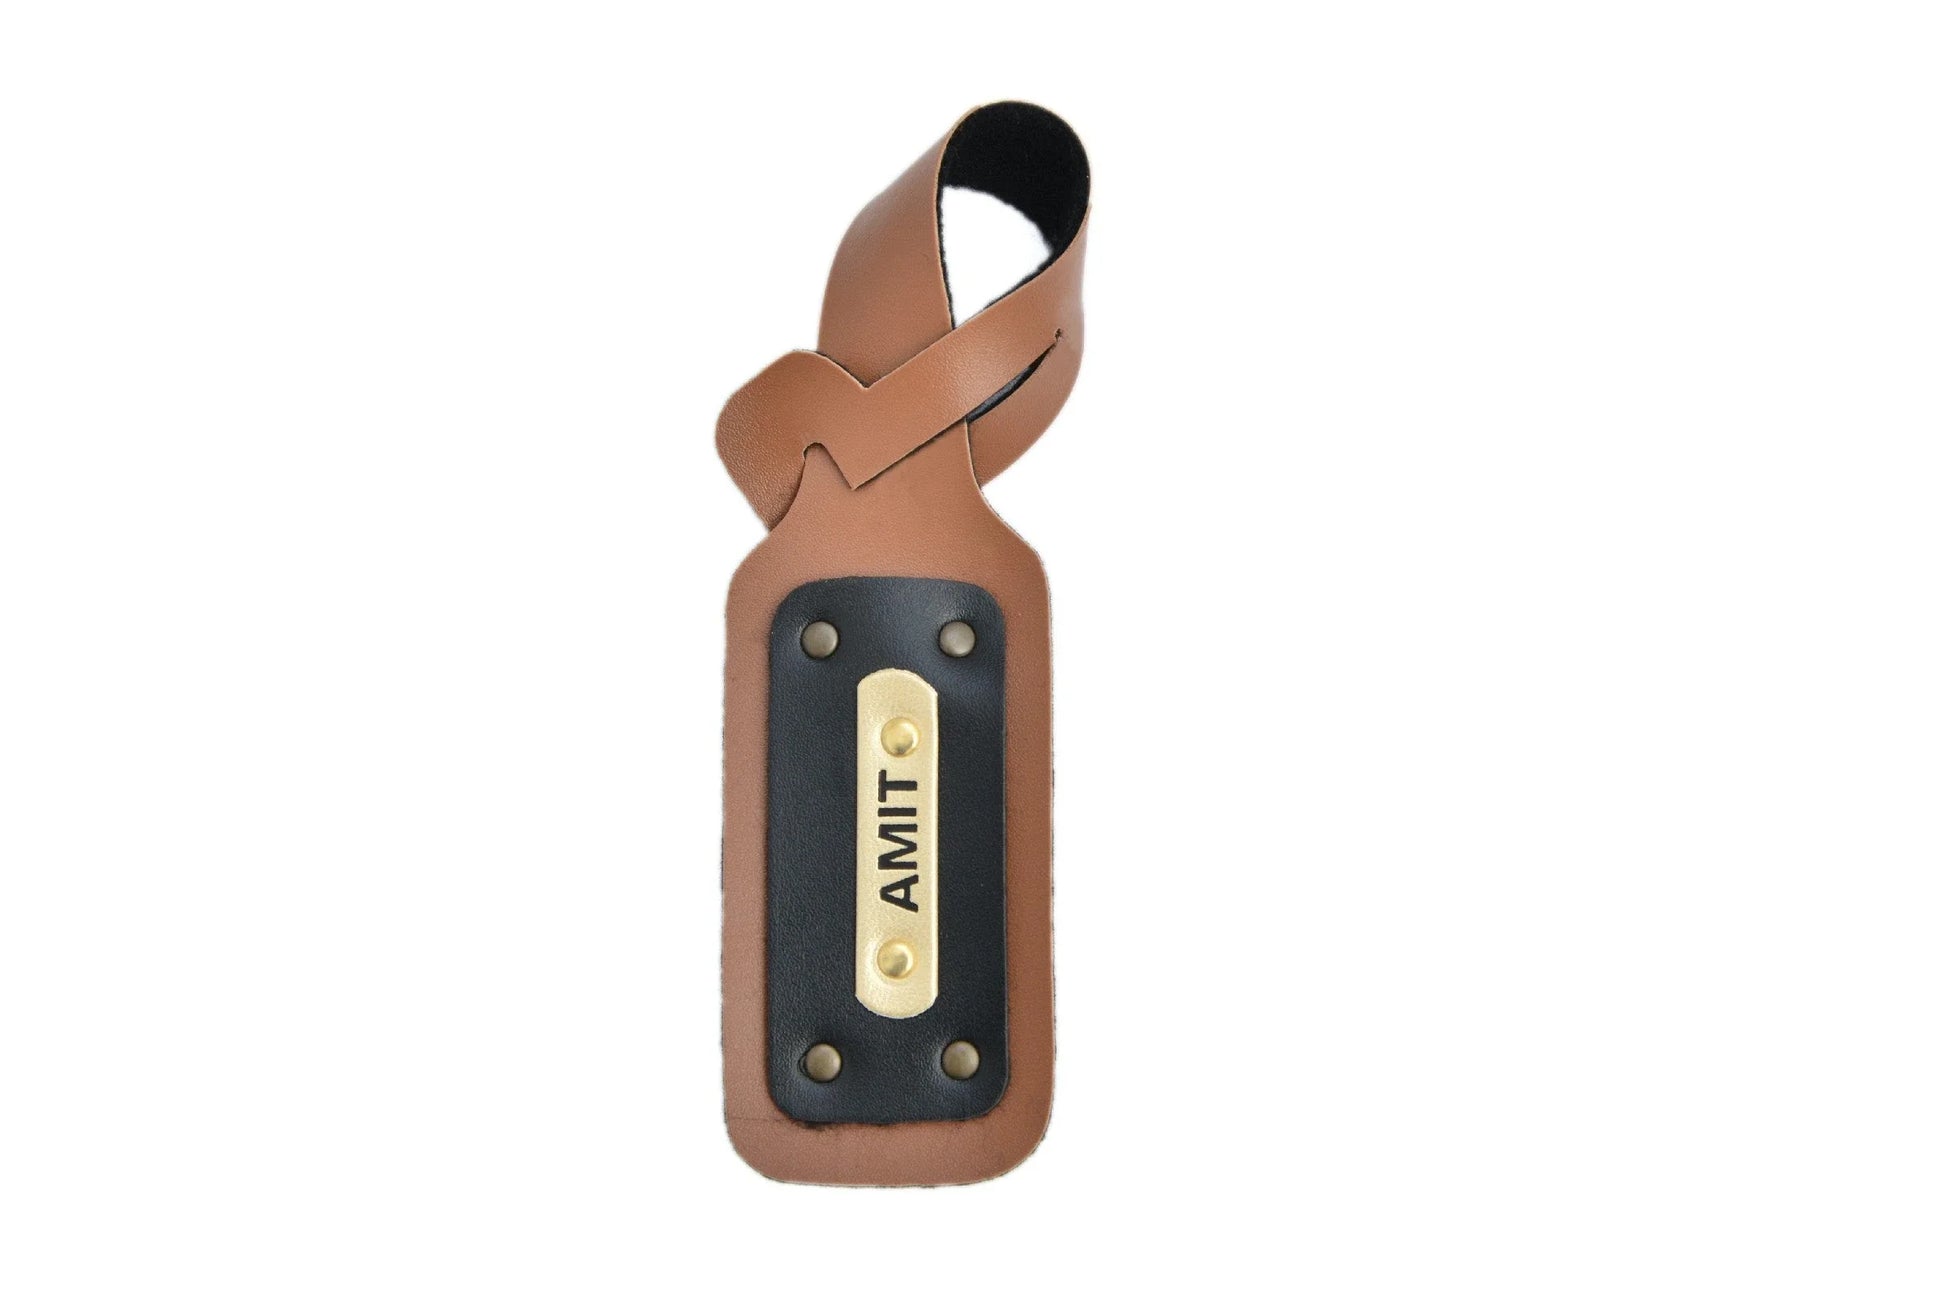 Travel in Style and Convenience with the Personalized and Practical Luggage Tag.